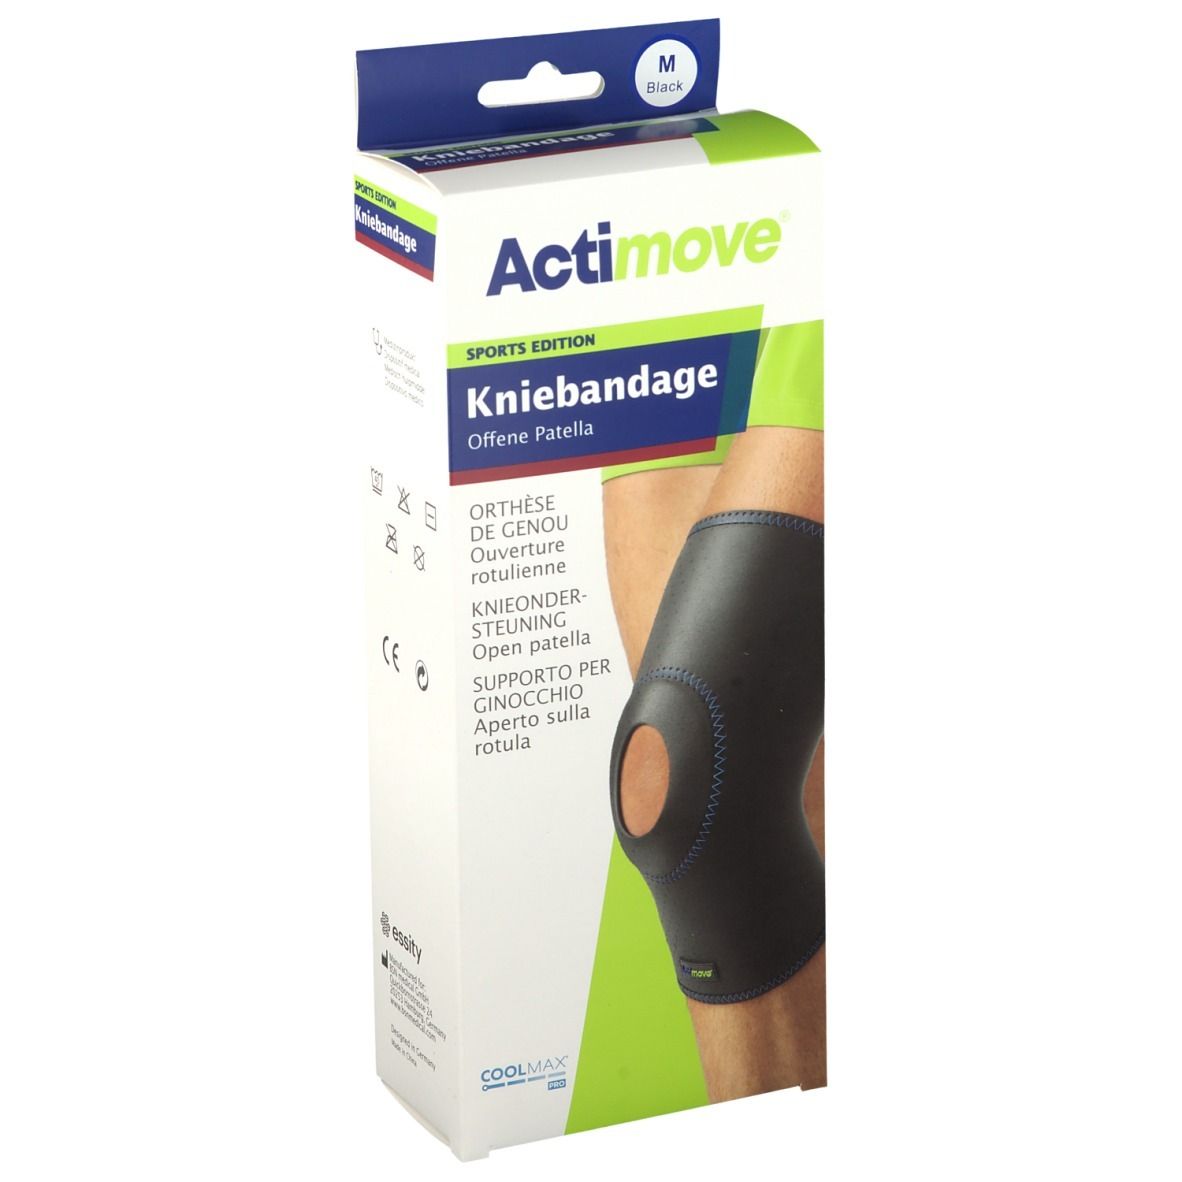 BSN MEDICAL Actimove® Sports Edition Kniebandage Gr. M